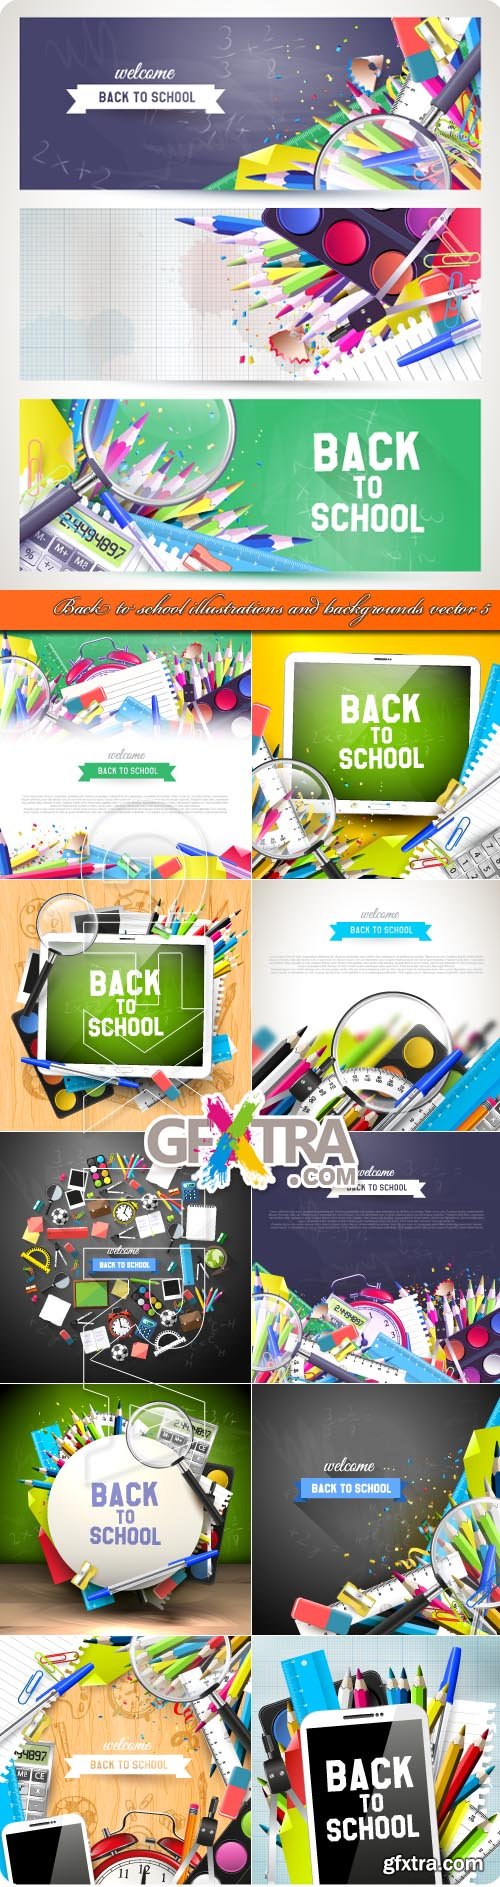 Back to school illustrations and backgrounds vector 5